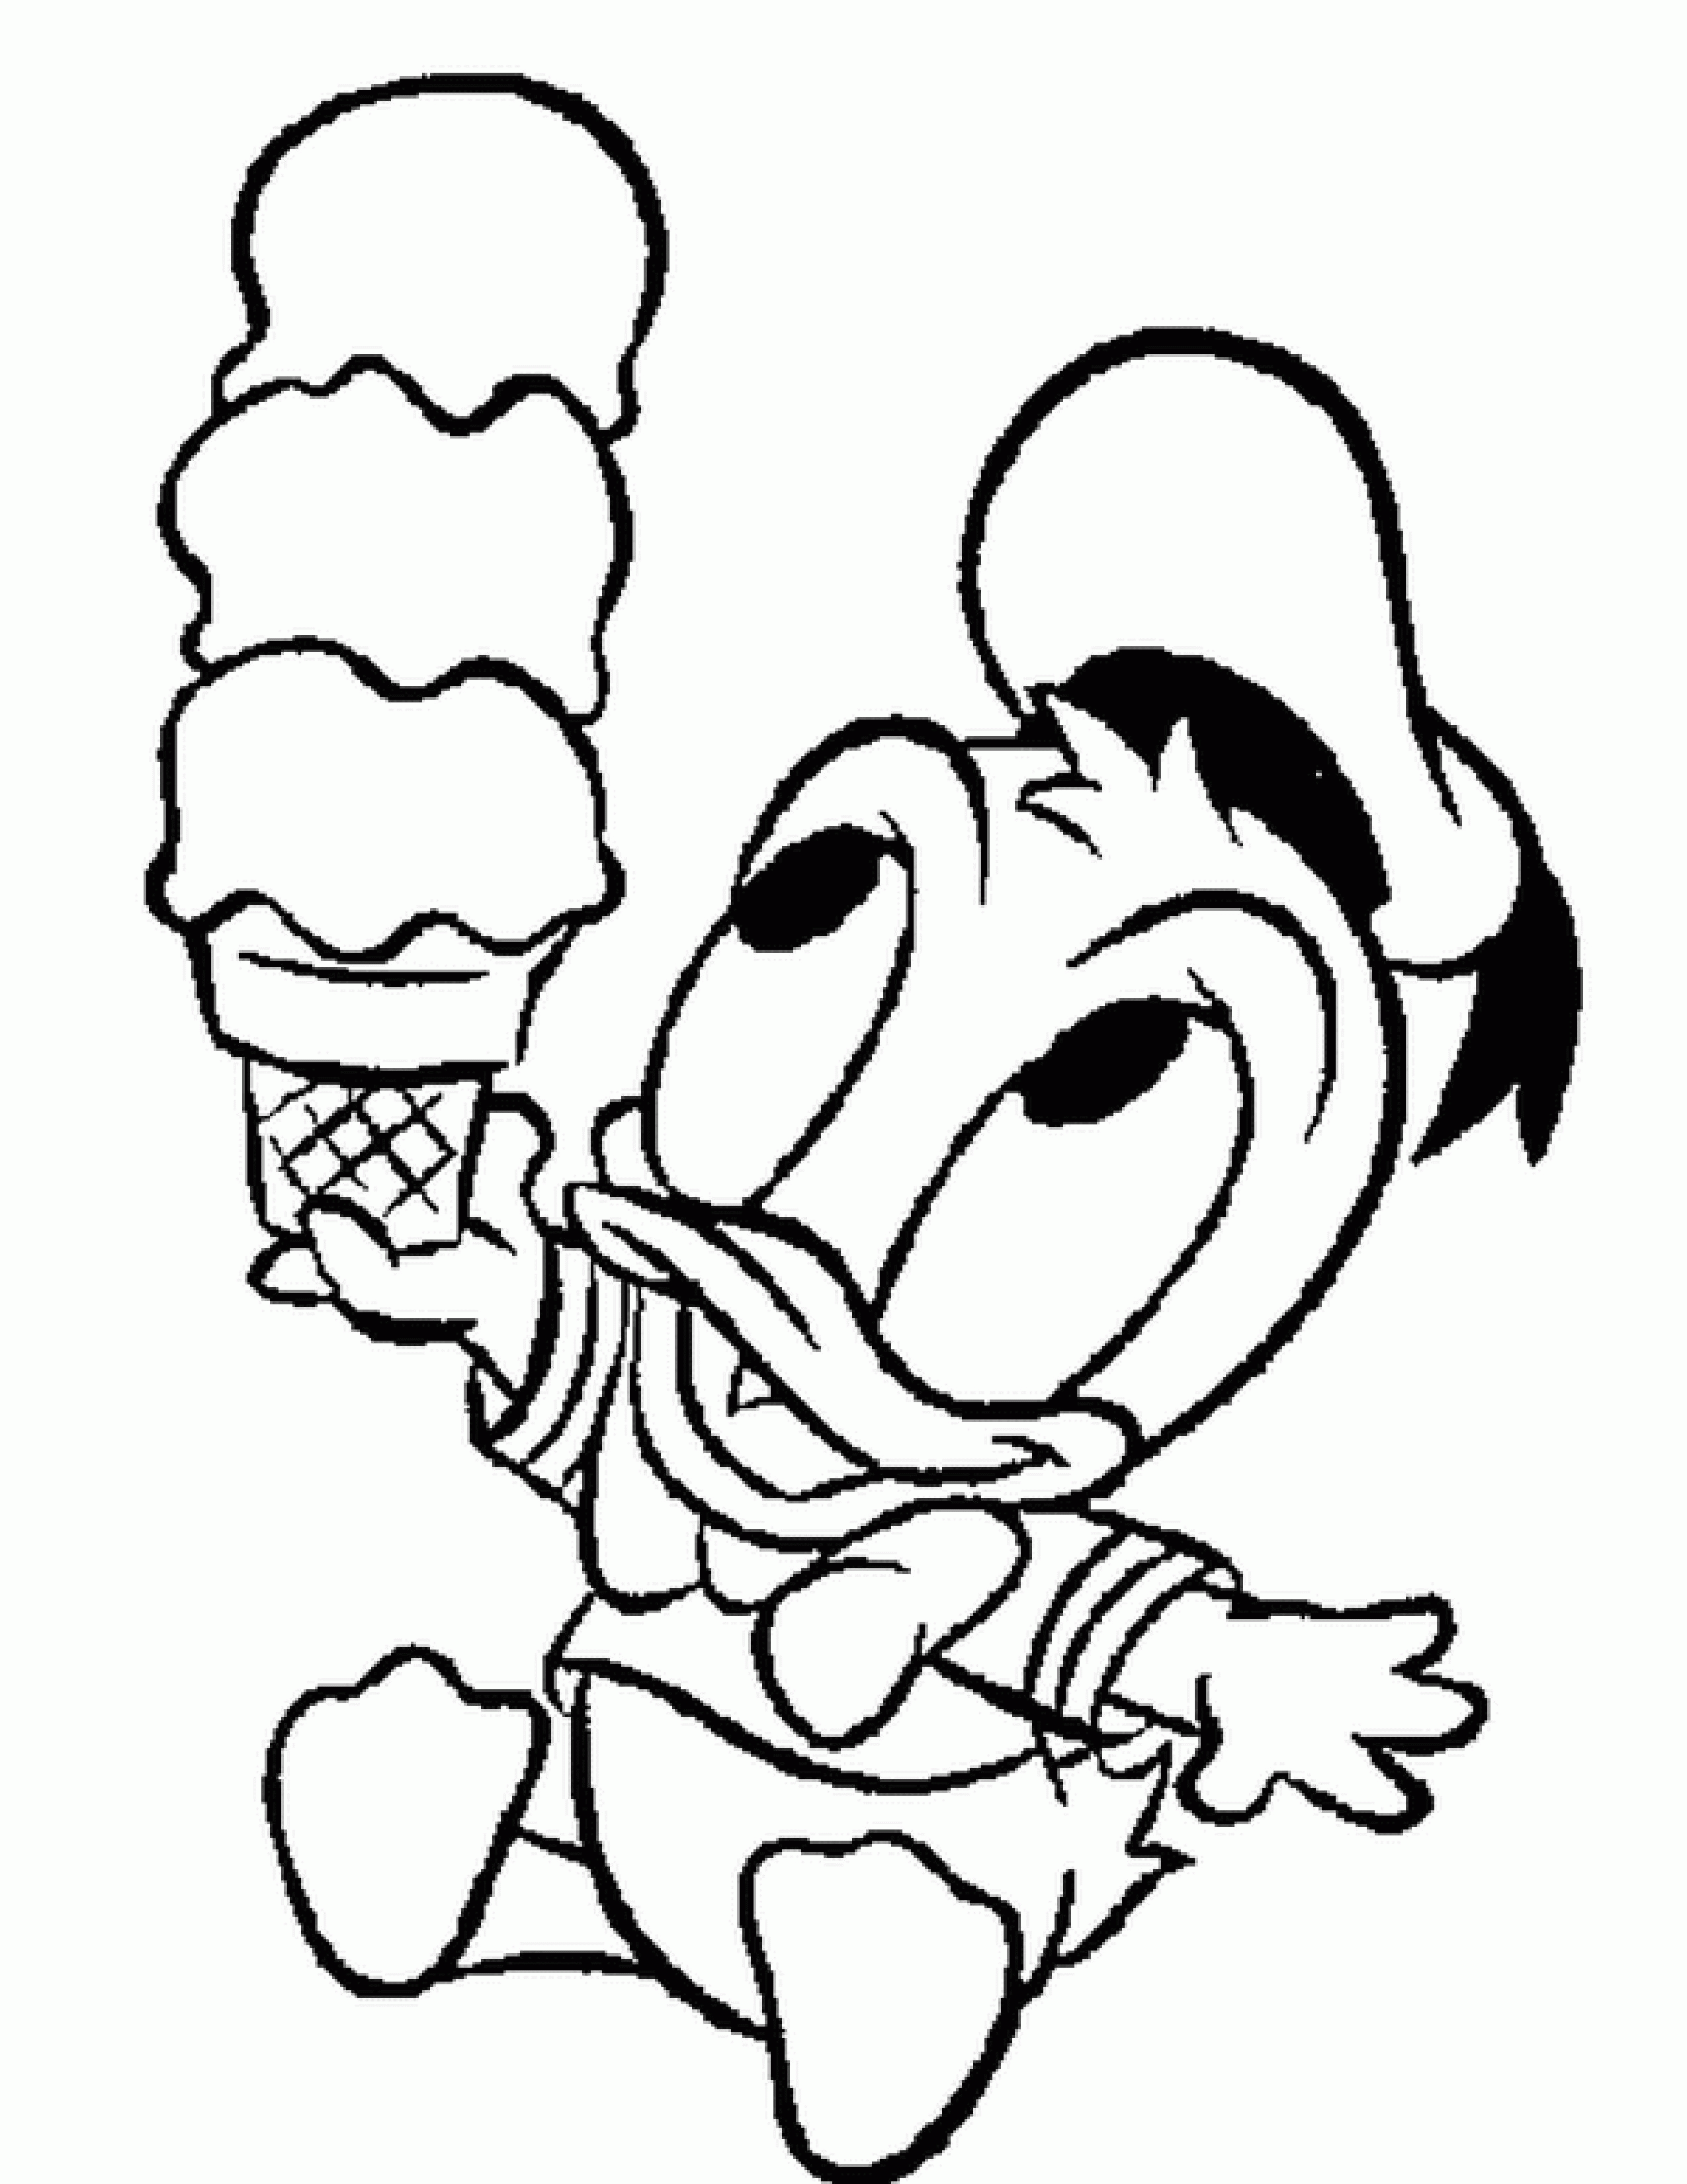 Get Walt Disney Coloring Book Pages | Coloring books for your childern